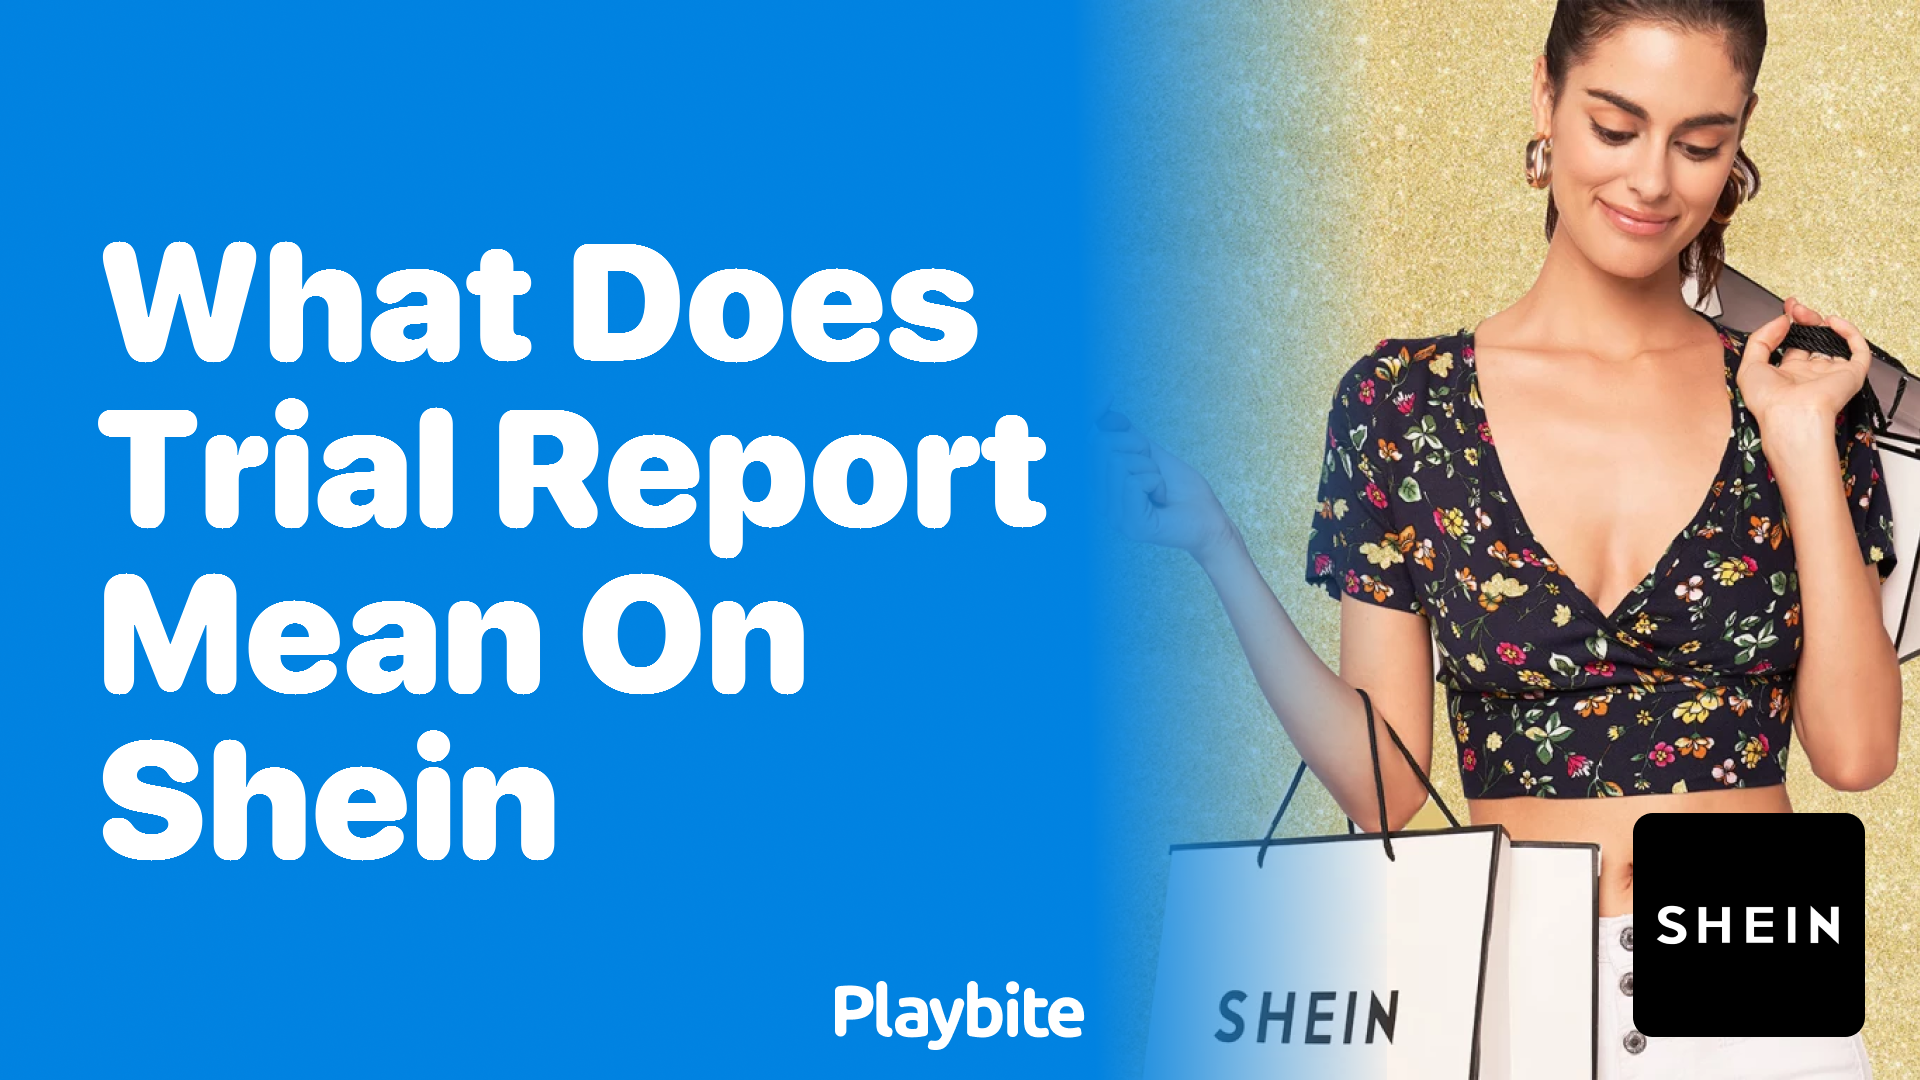 What Does 'Trial Report' Mean on SHEIN? - Playbite